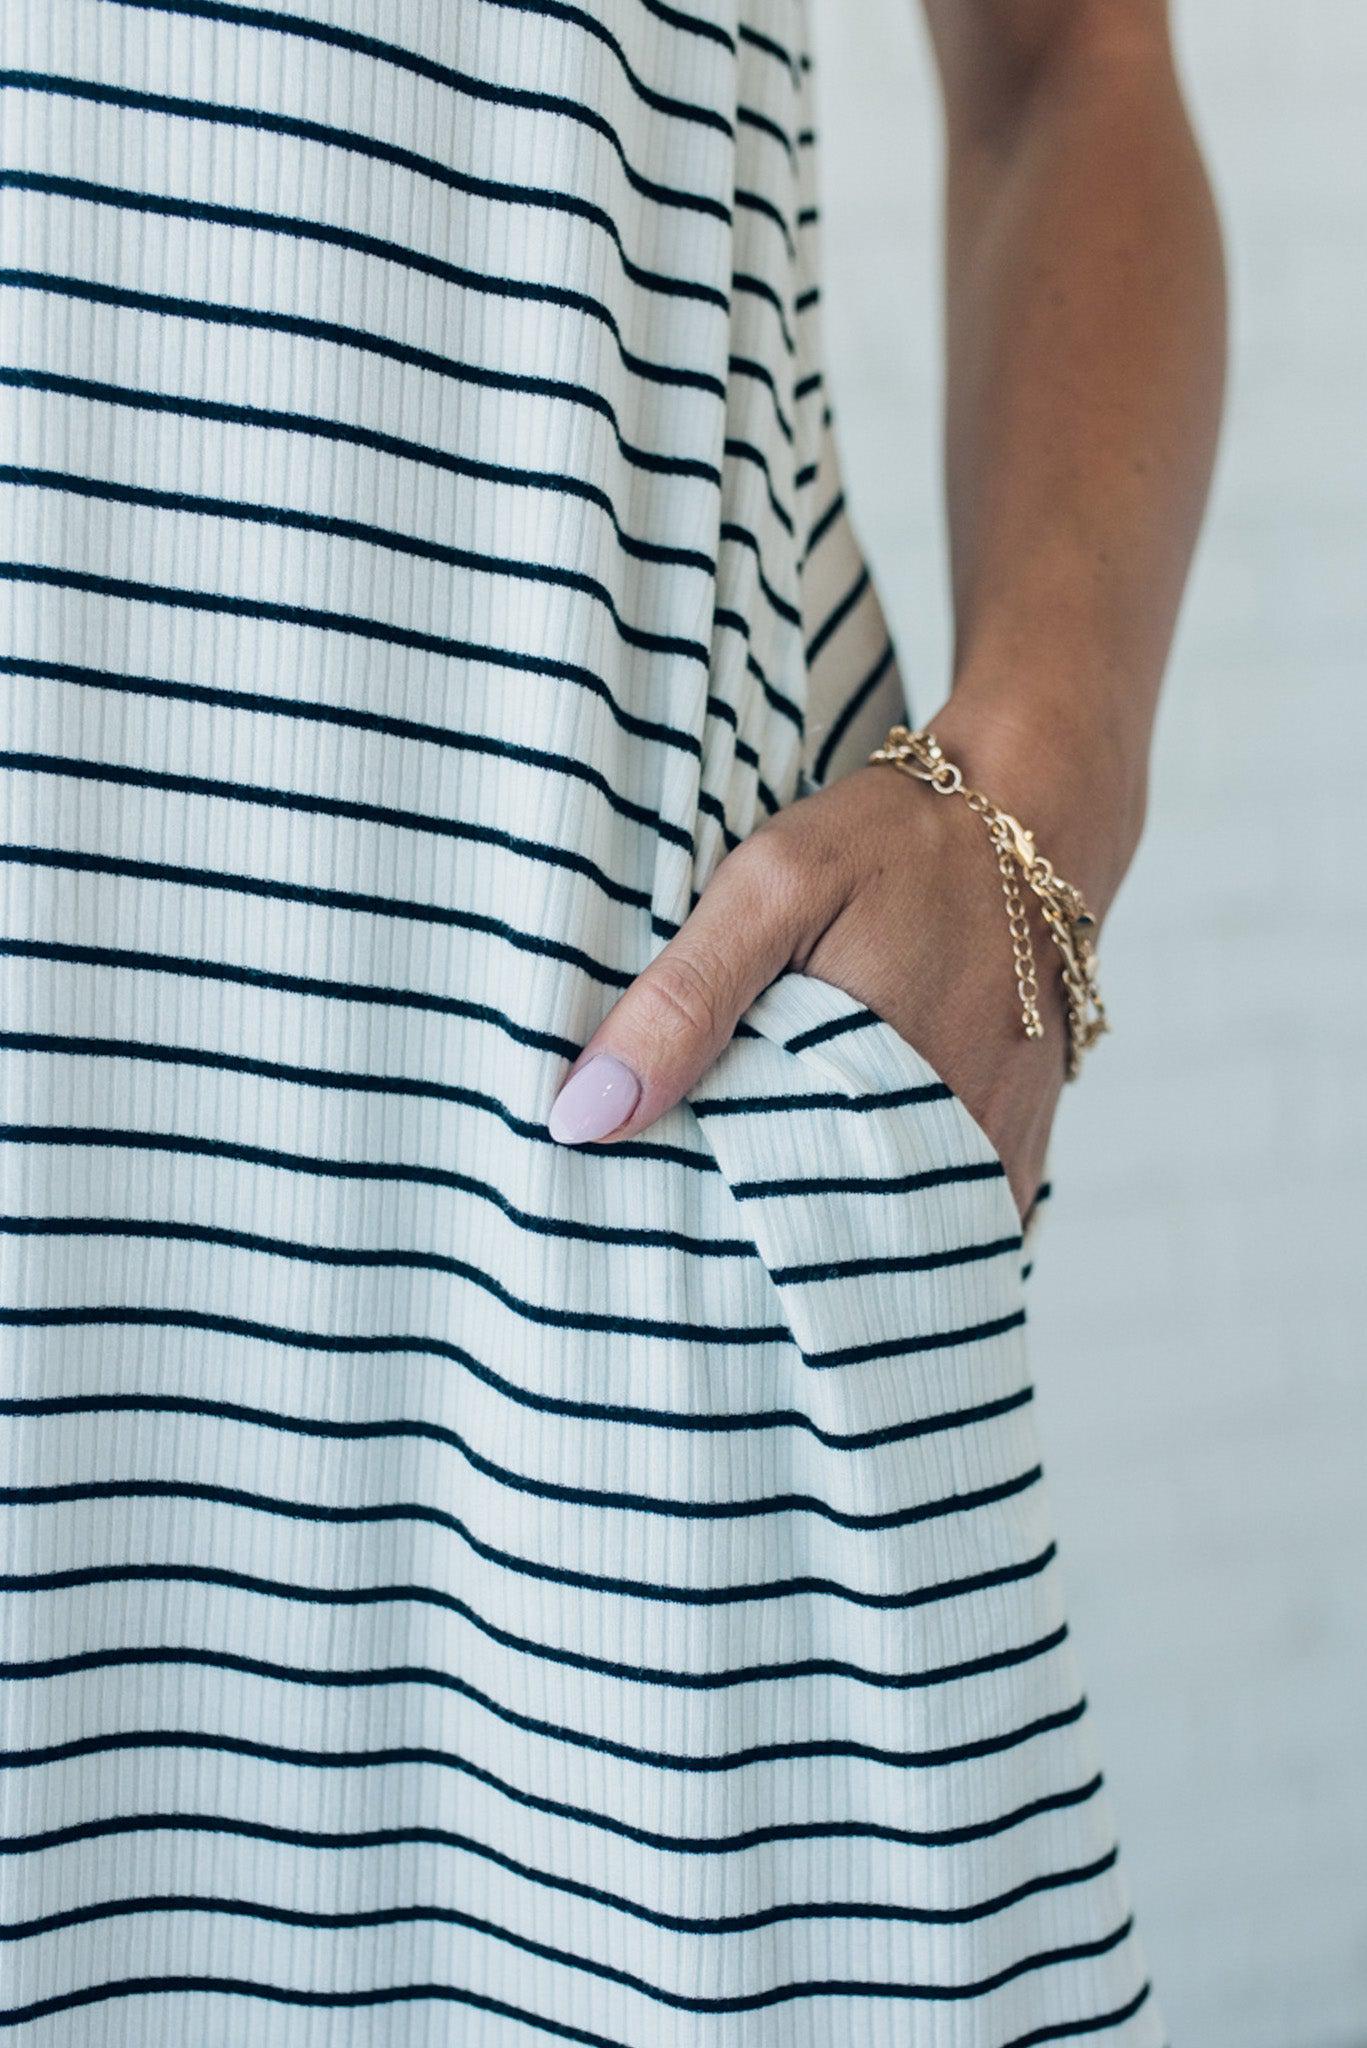 woman wearing a black and white striped tank dress that is knee length and has side pockets